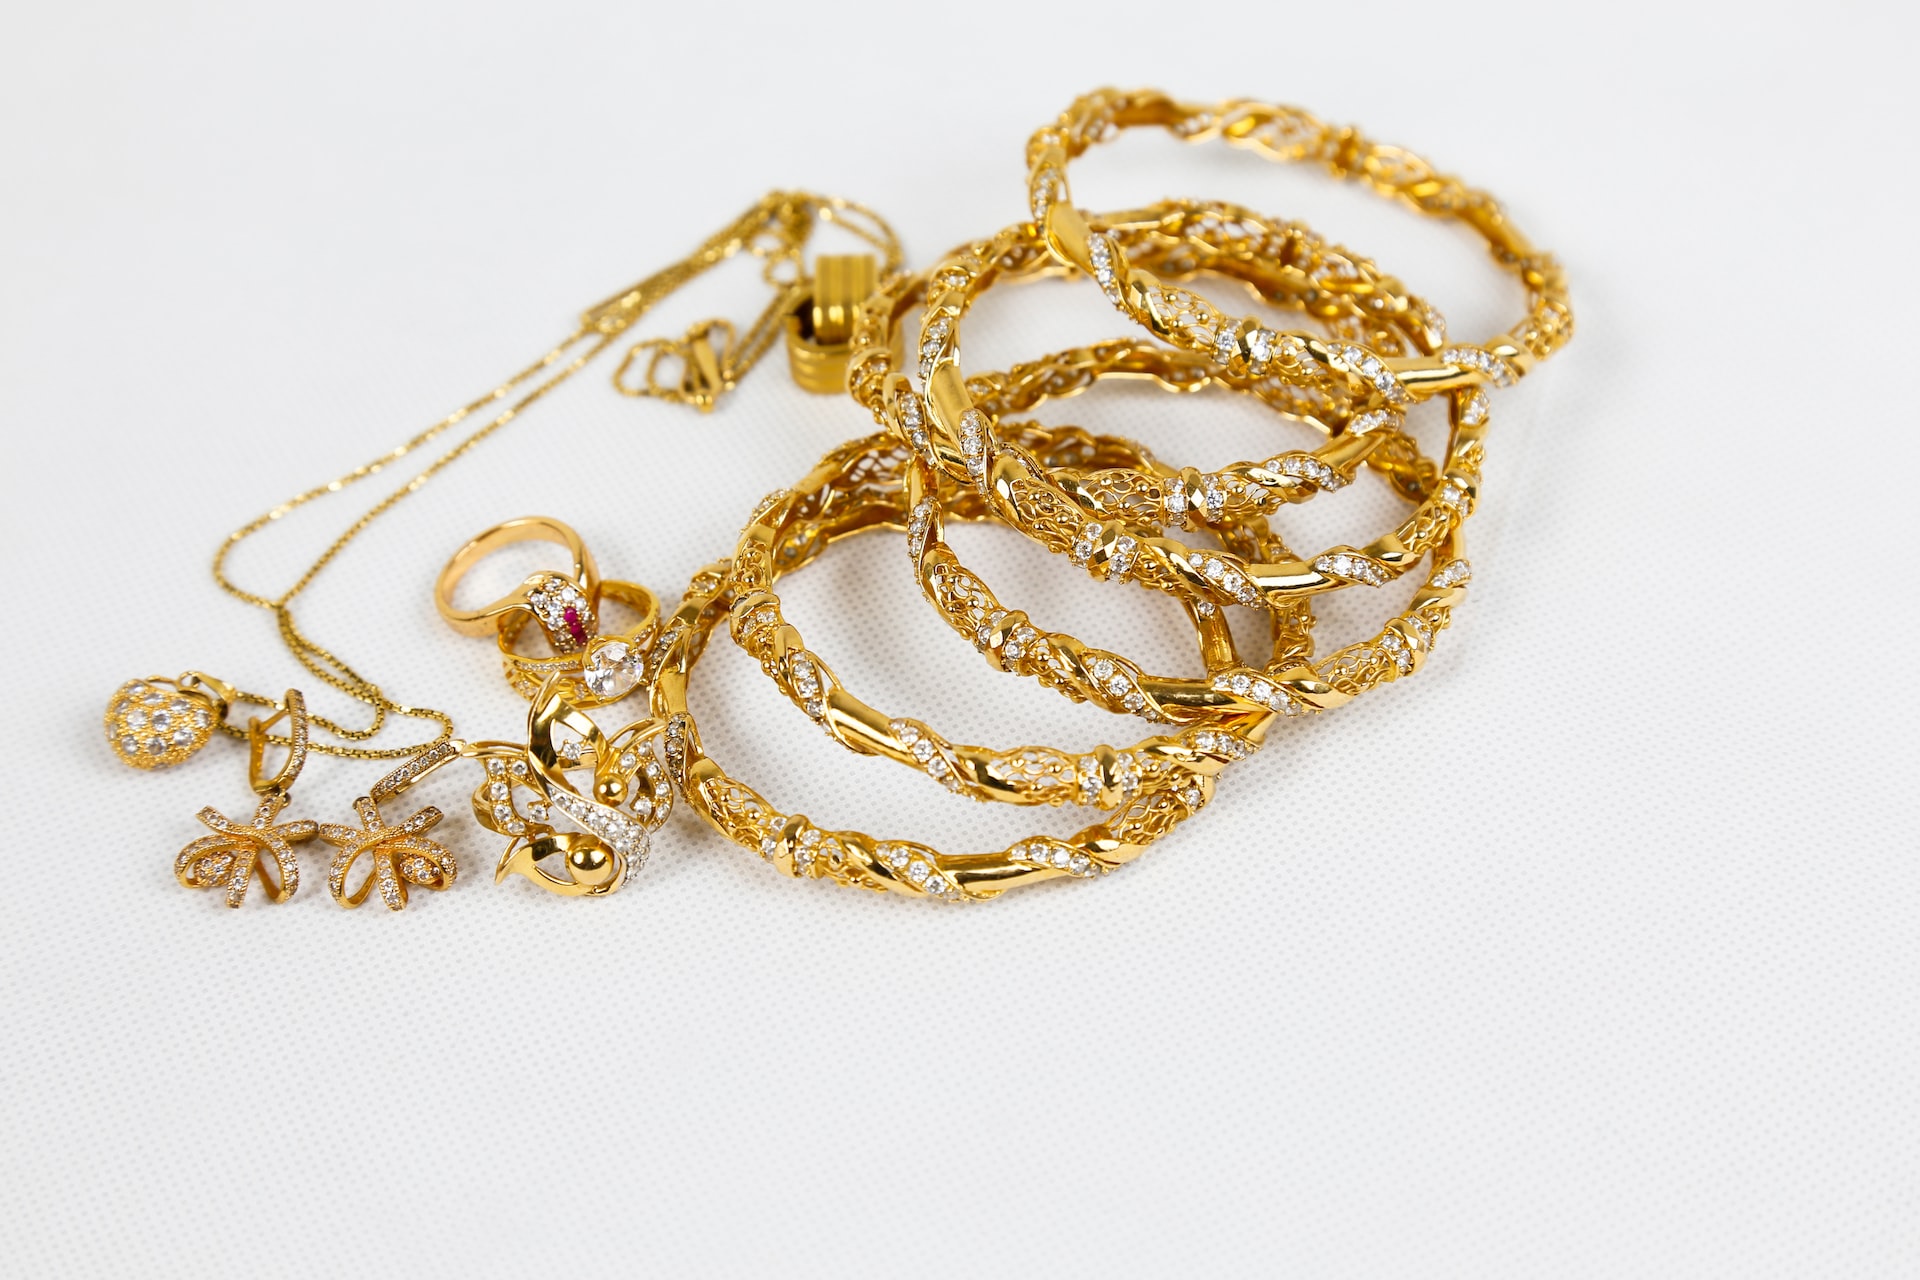 Credibility Helps Court Determine Ownership and Value of Jewelry in Separation